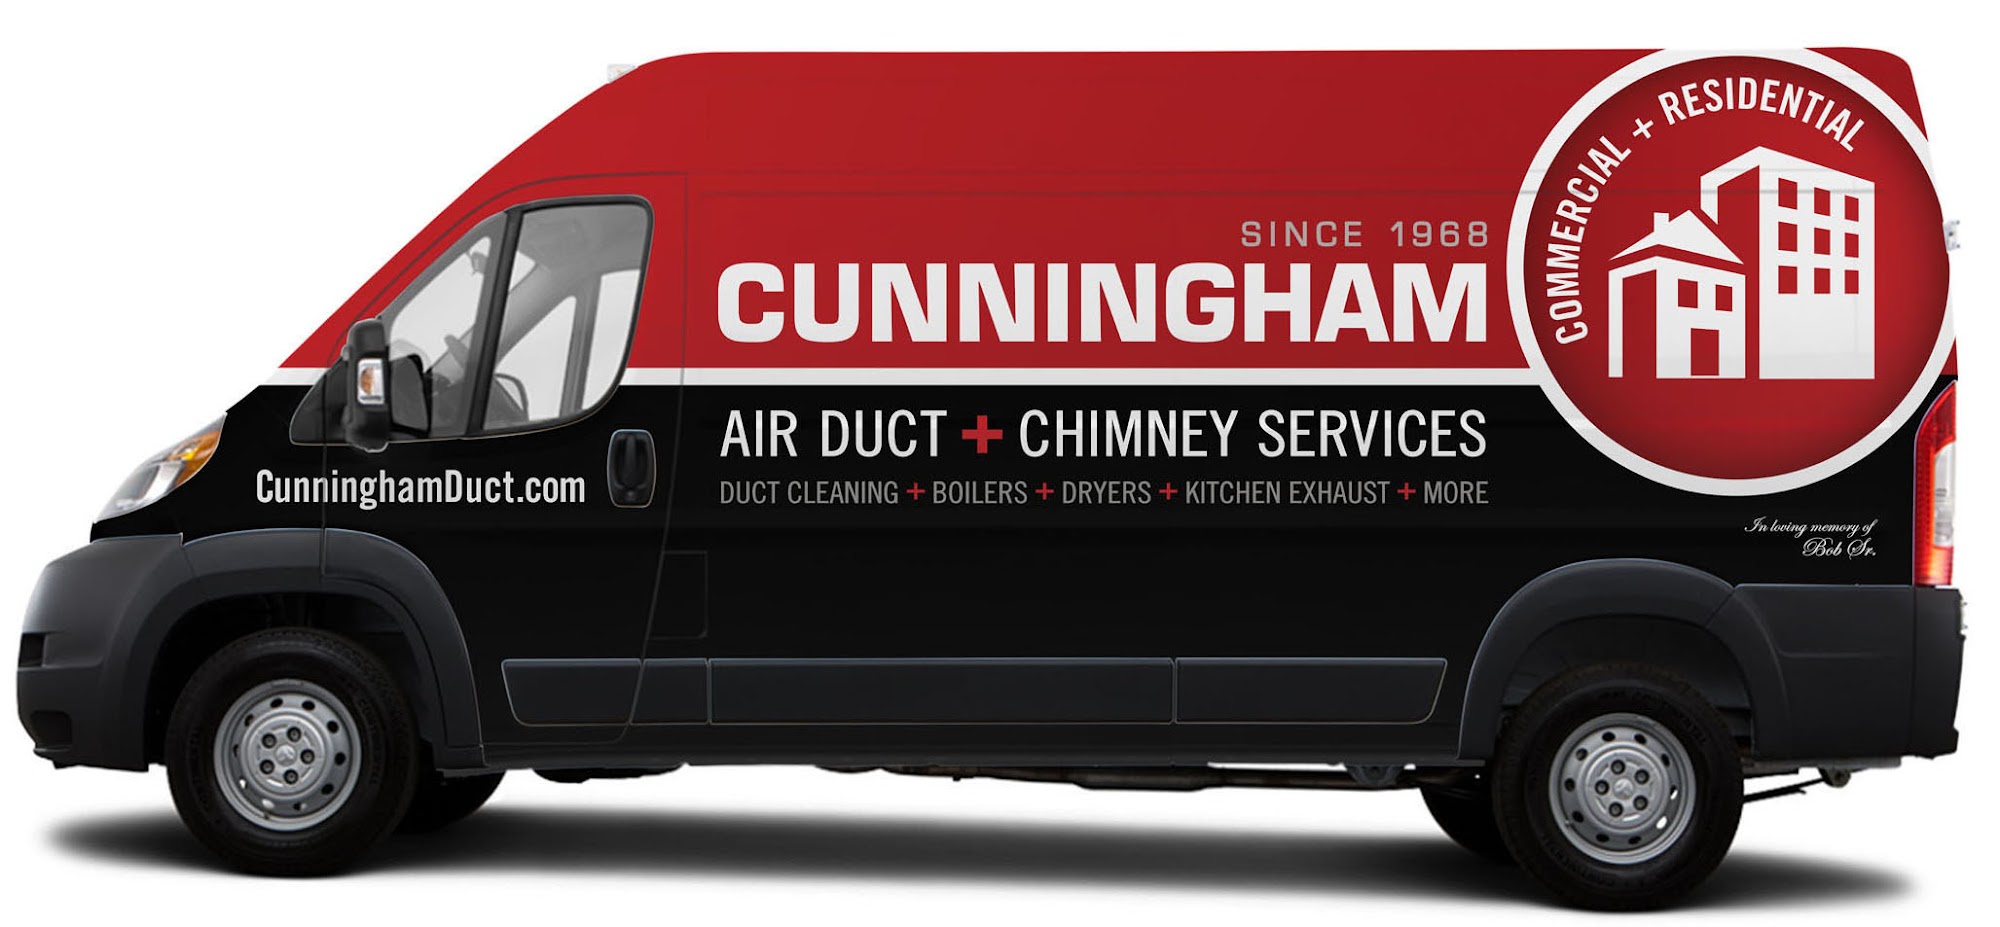 Cunningham Air Duct Cleaning and Chimney Services